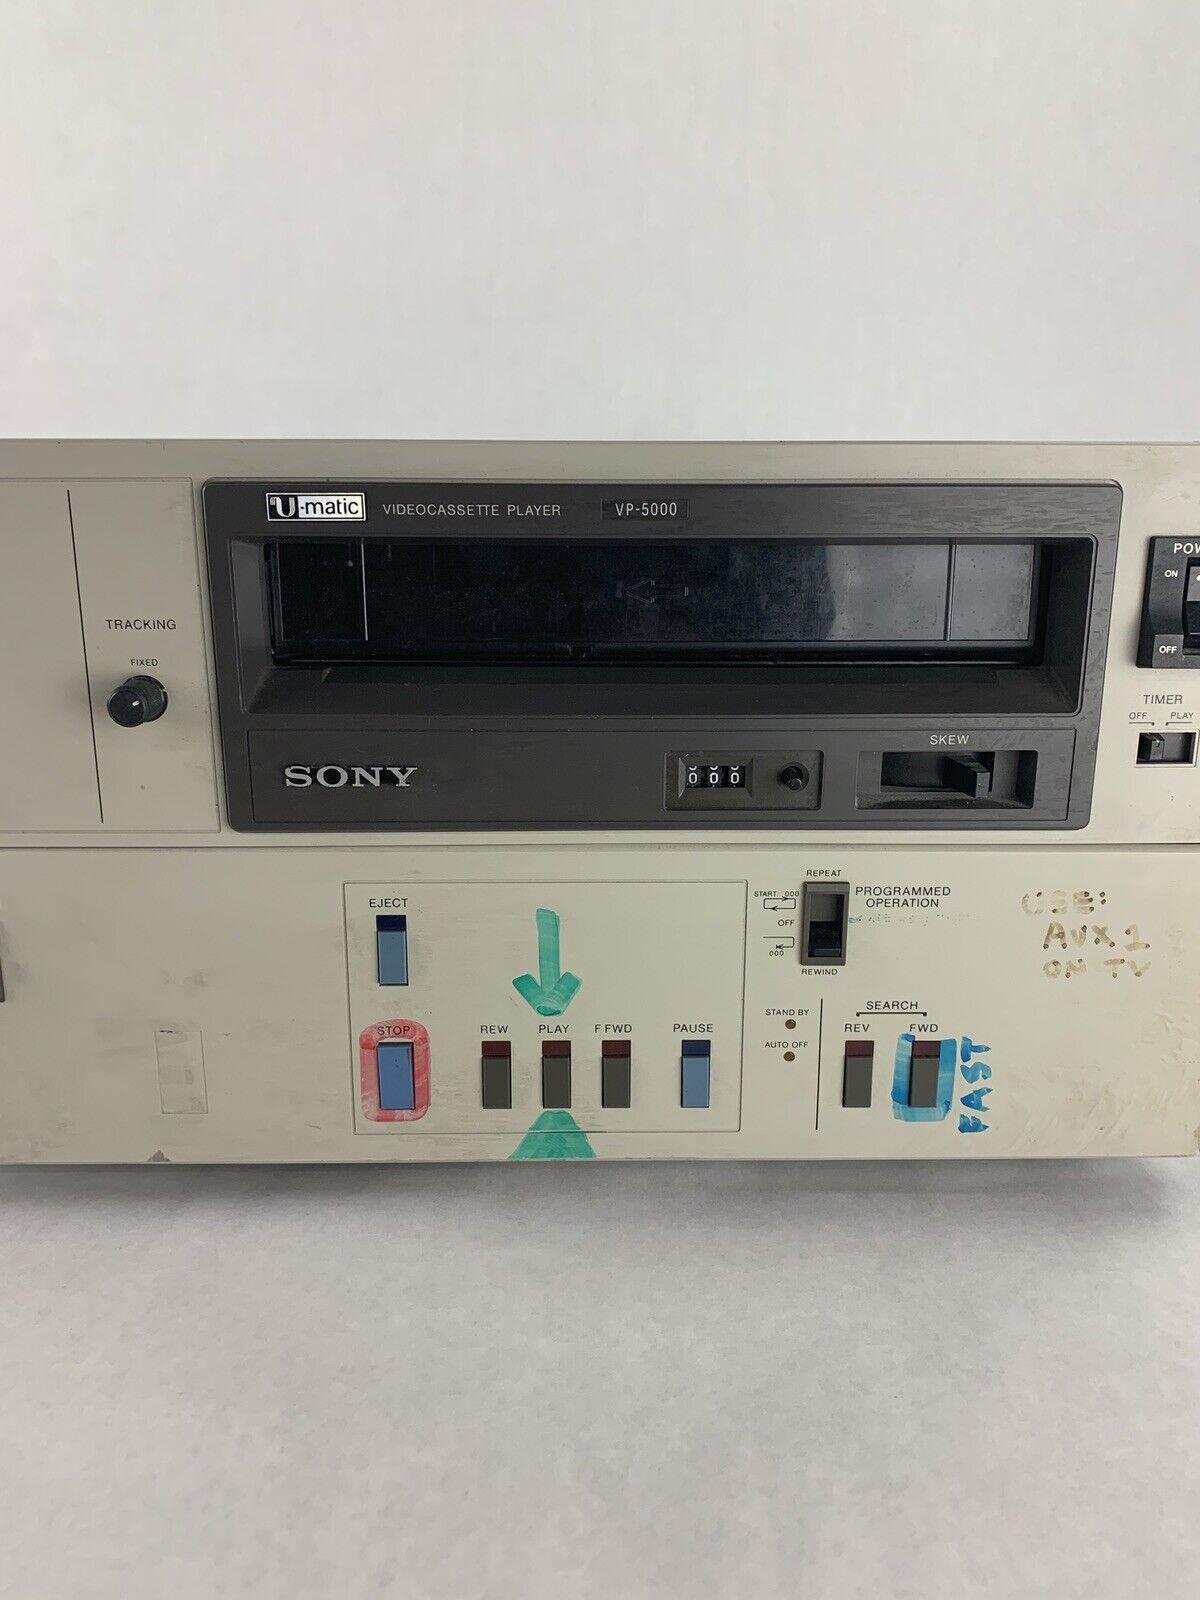 Sony VP-5000 Videocasette Player U-matic Semi Tested Missing Top Screws